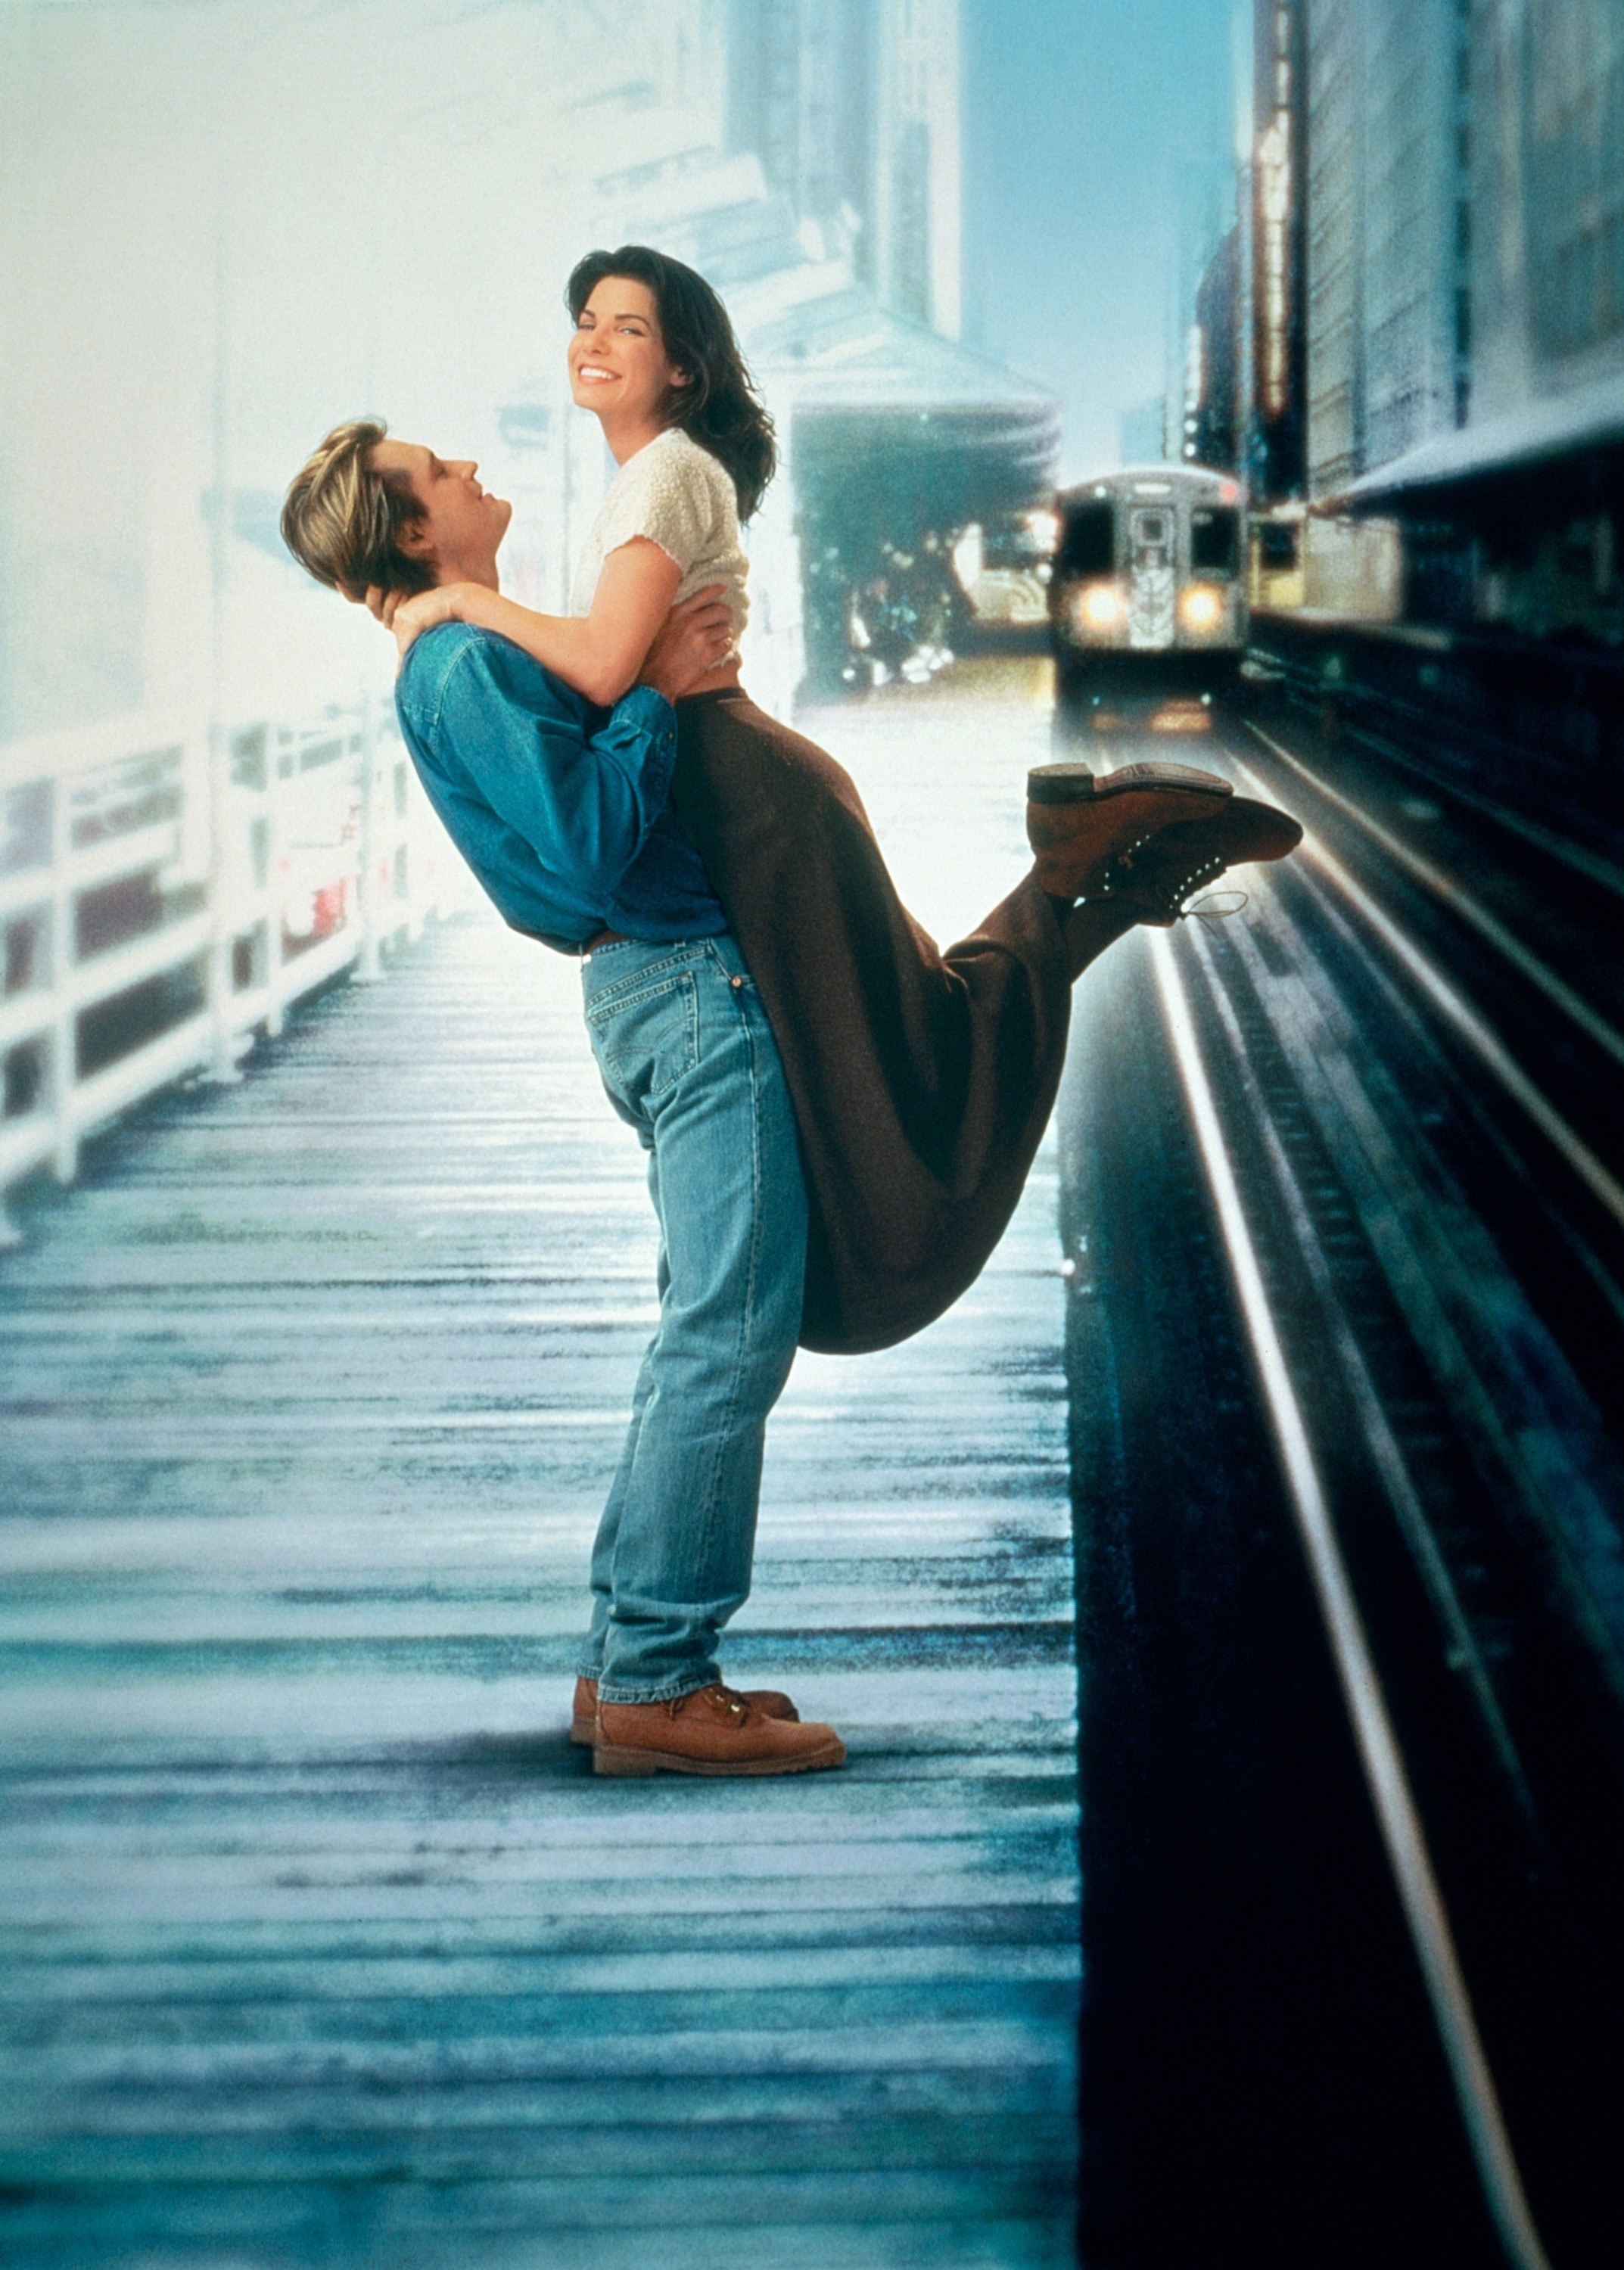 A man lifts a woman on the platform of a subway station